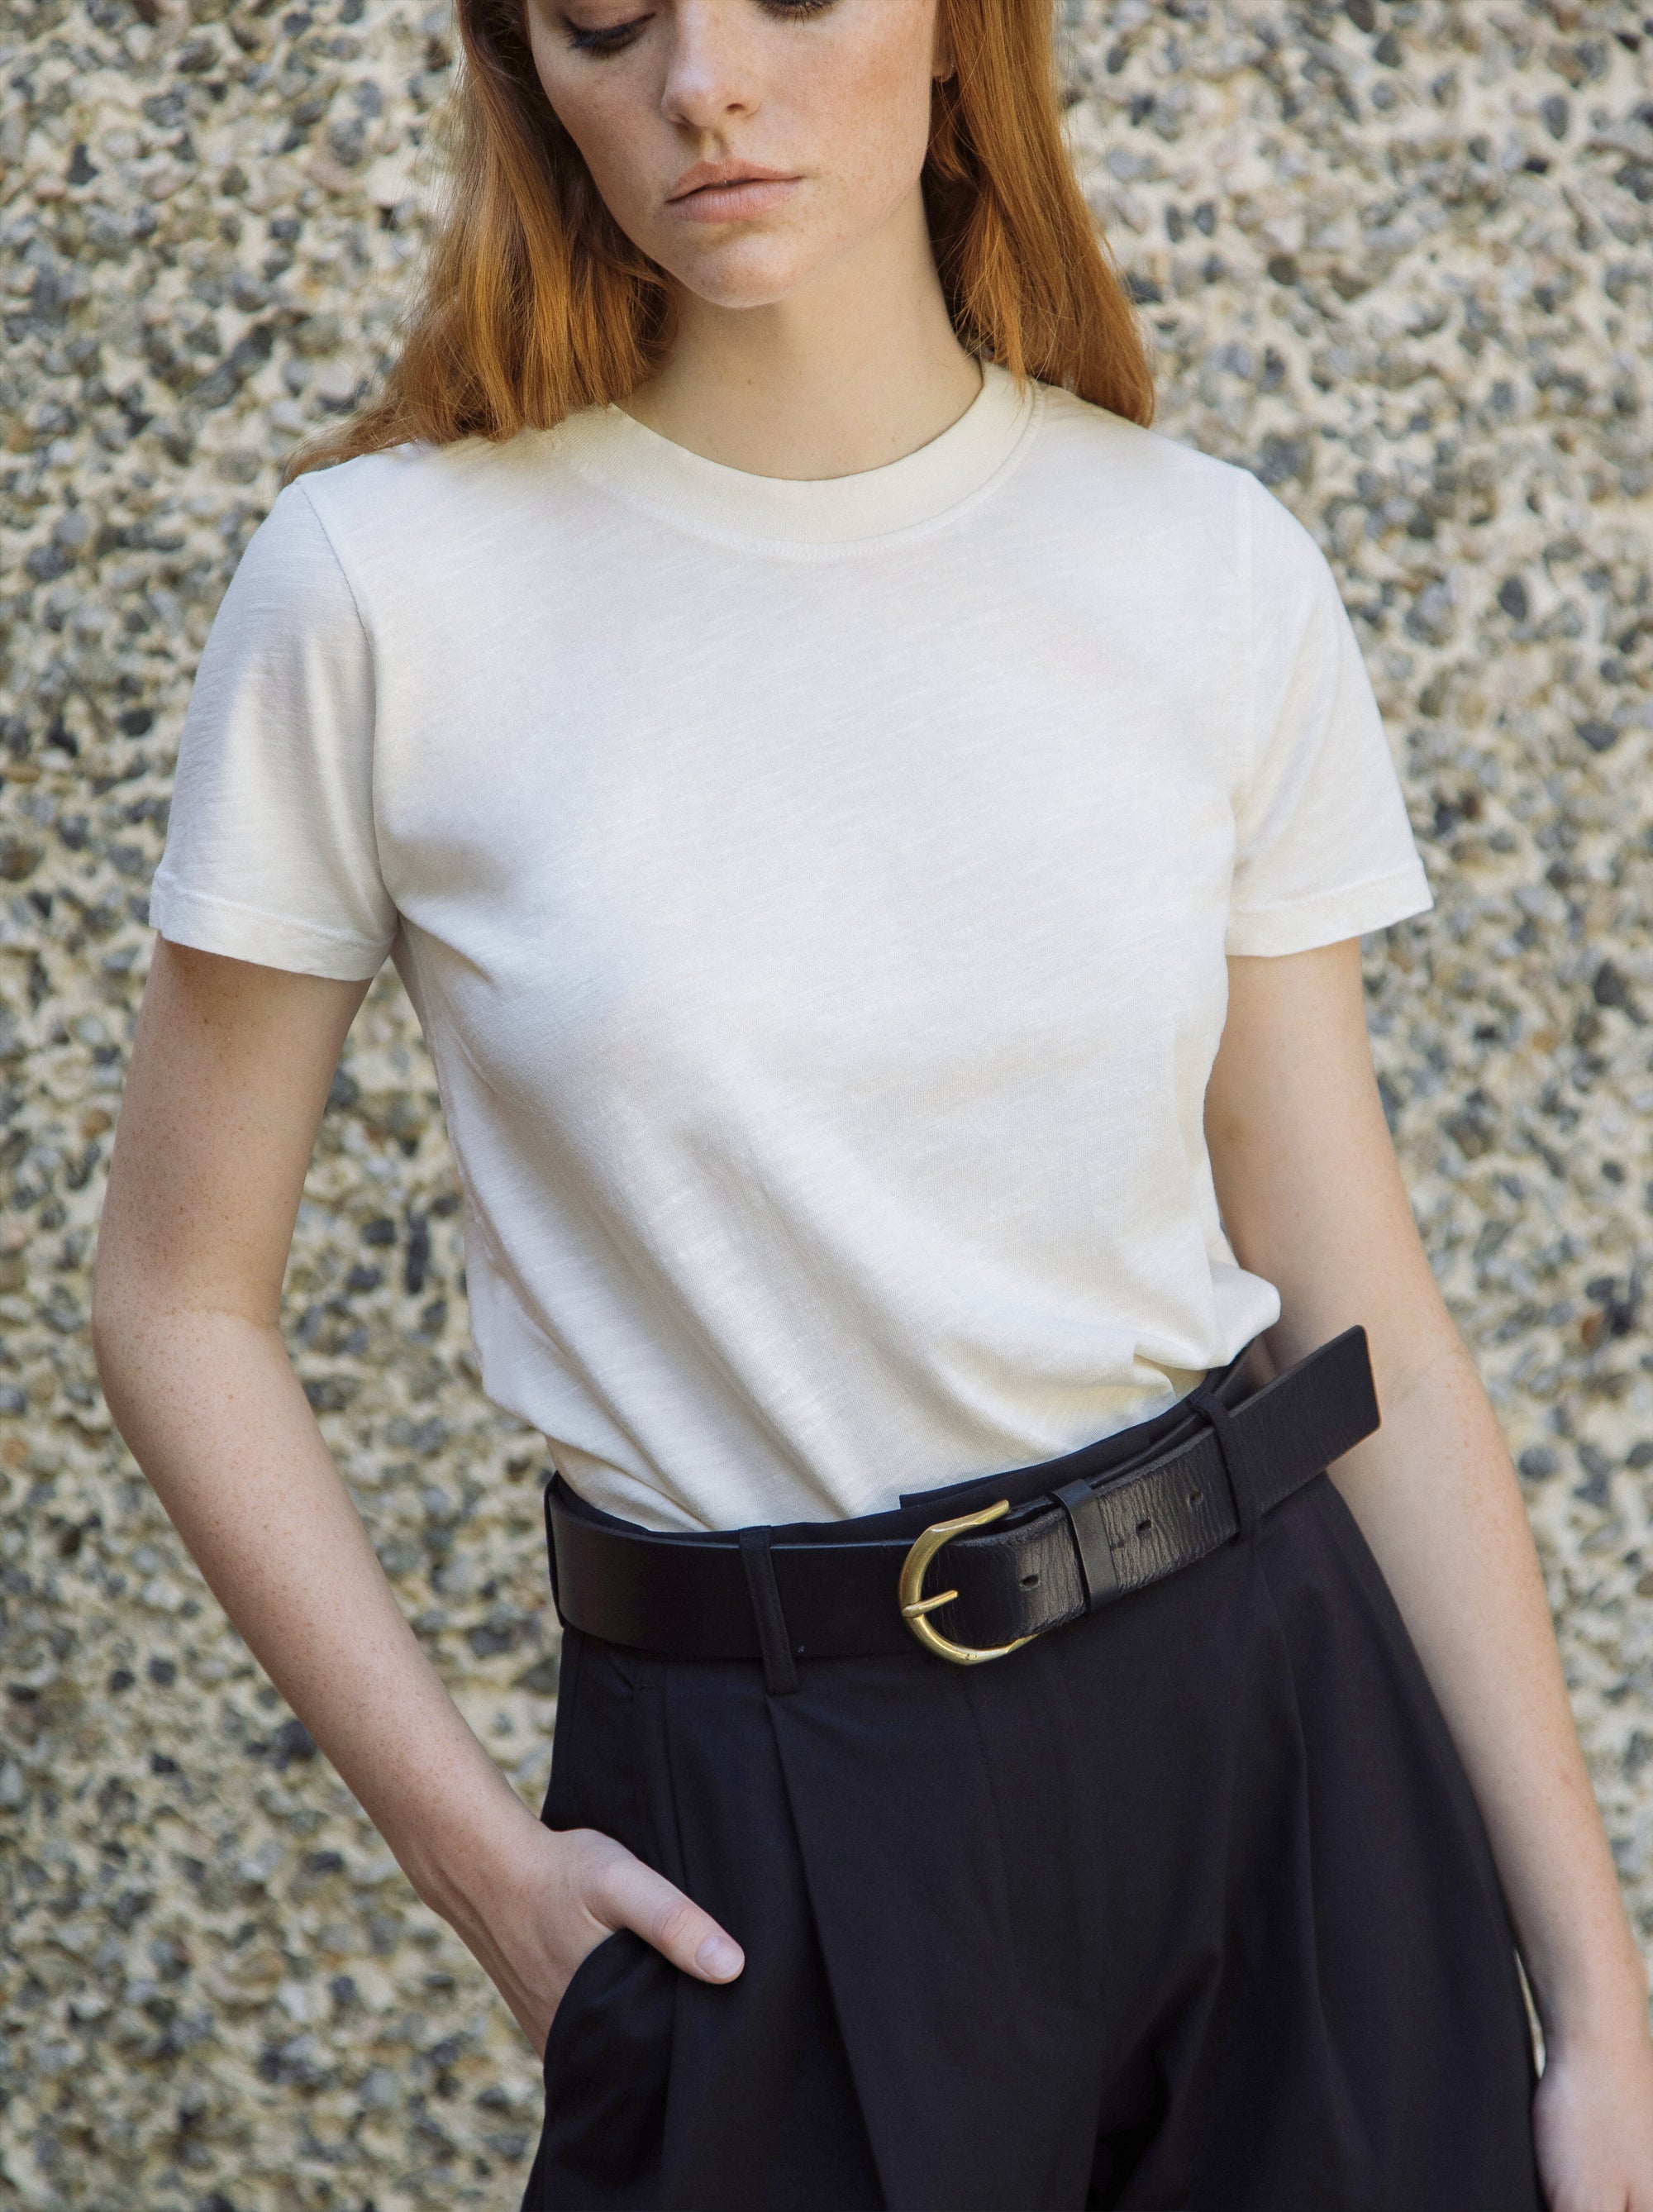 woman in a white t-shirt and black pants.